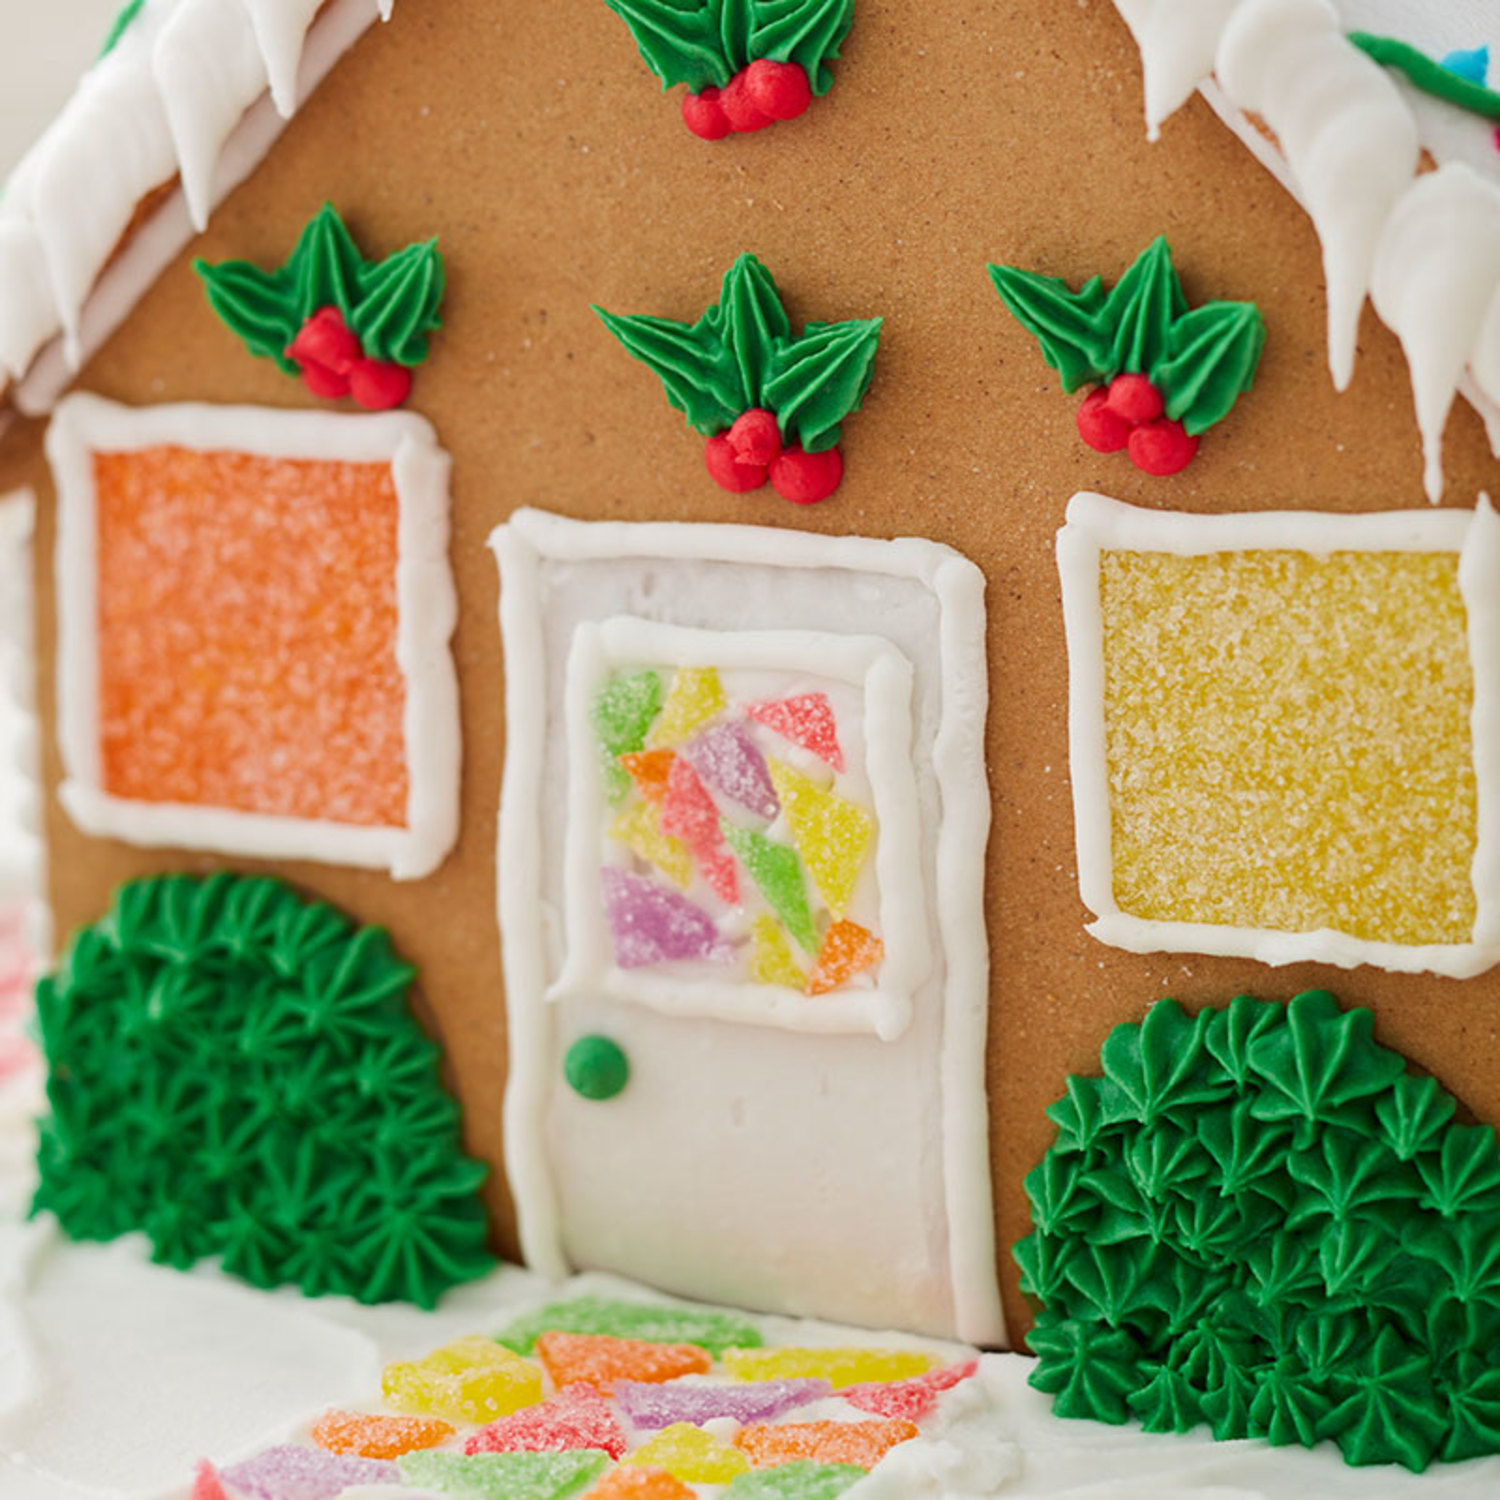 How to Make Bushes on a Gingerbread House